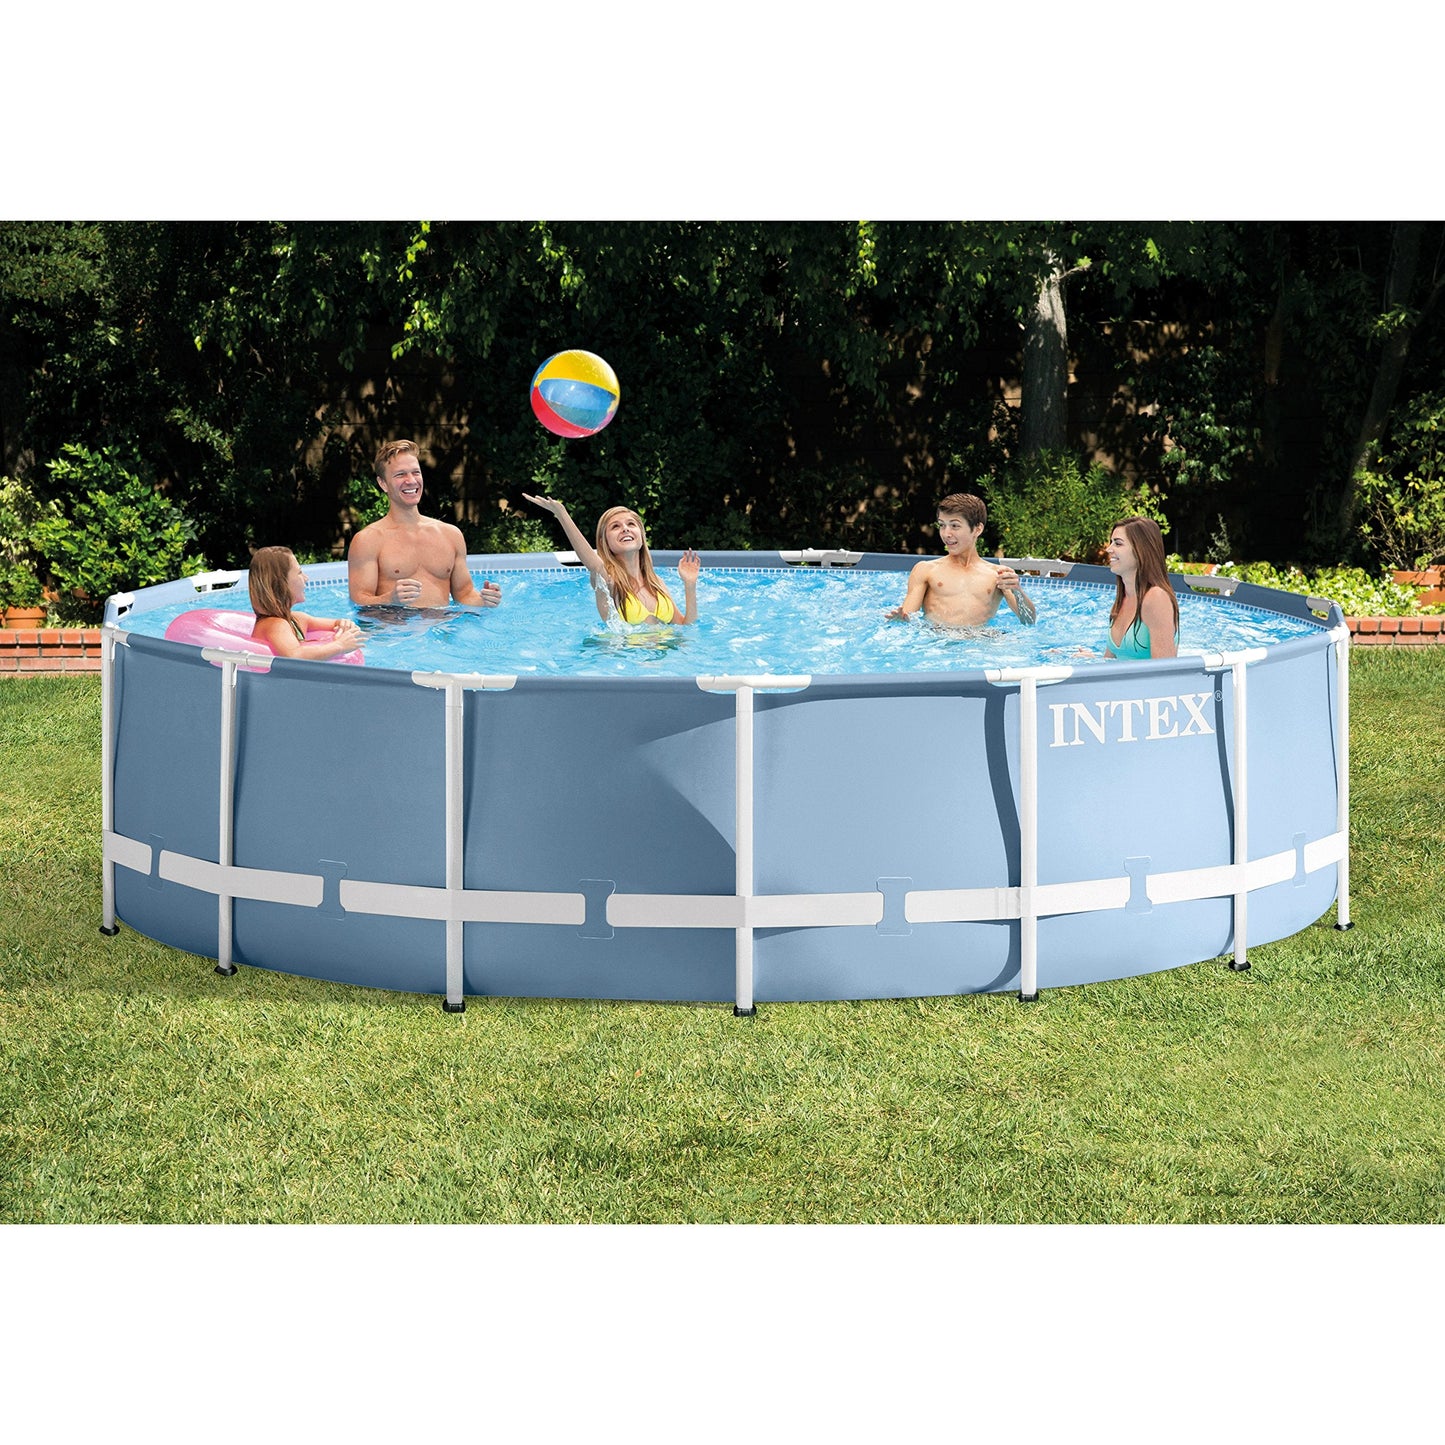 Intex 15ft X 42in Prism Frame Pool Set with Filter Pump, Ladder, Ground Cloth & Pool Cover